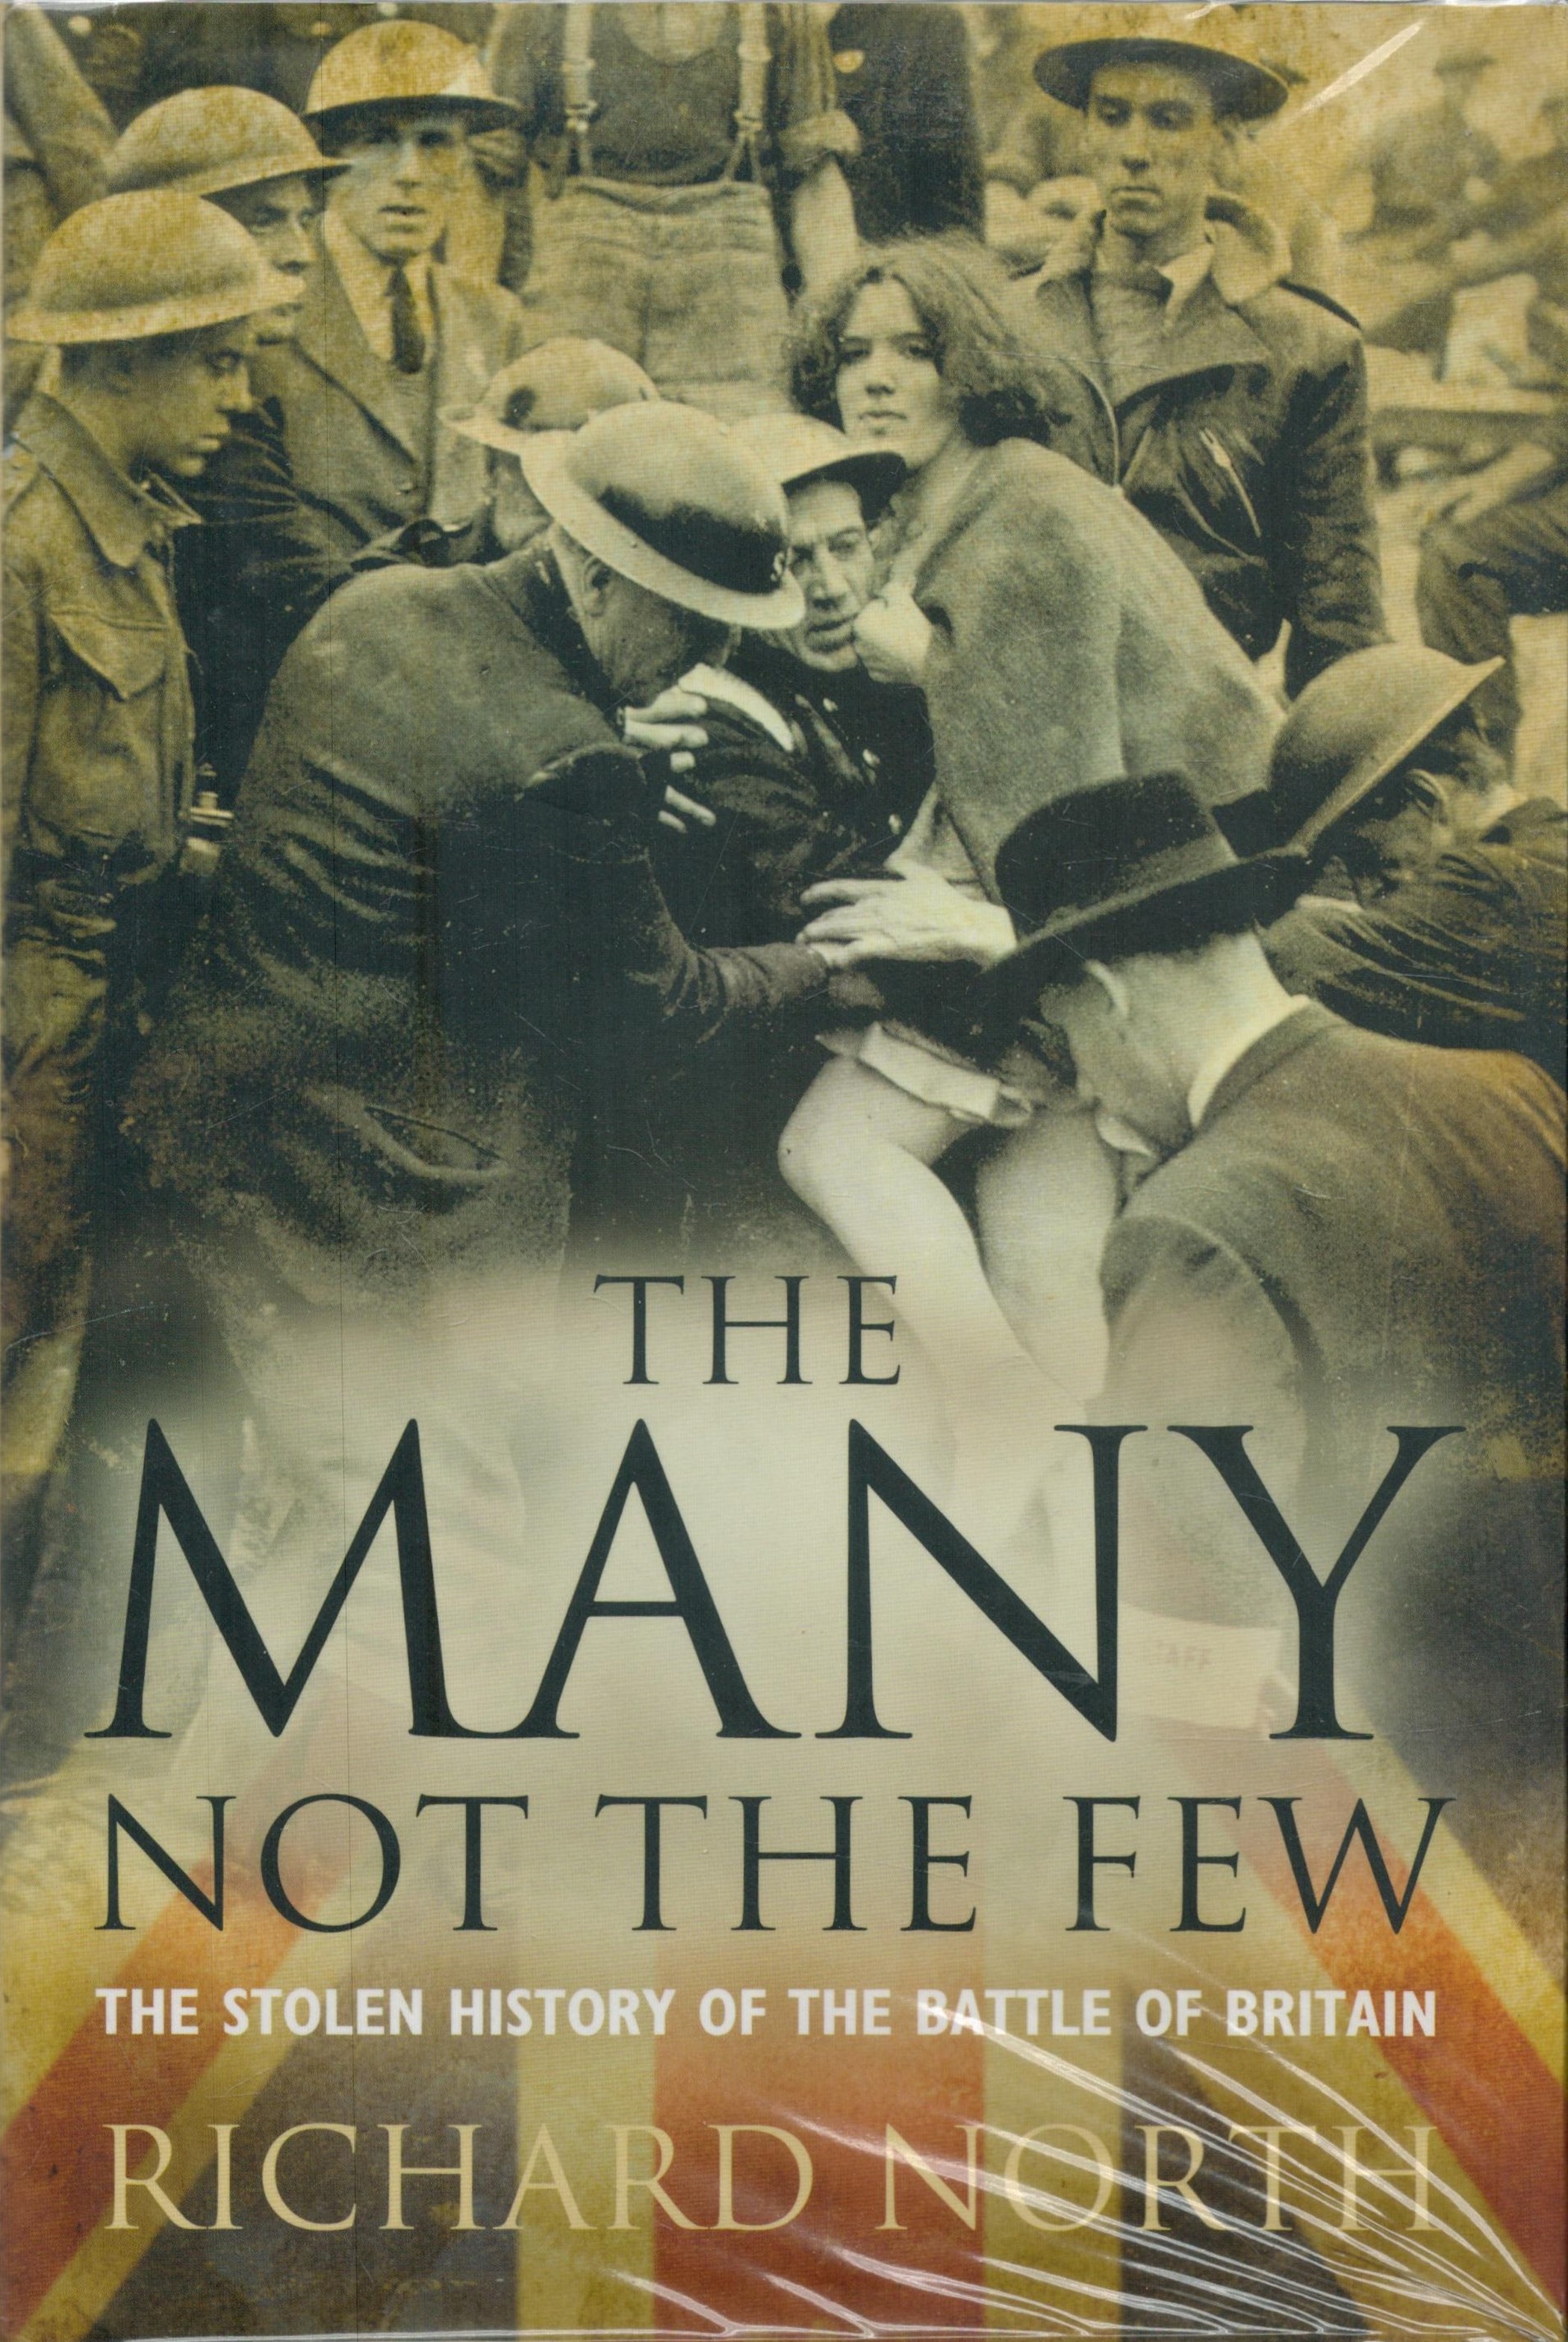 The Many Not the Few - The Stolen History of the Battle of Britain by Richard North 2012 Hardback - Image 2 of 9